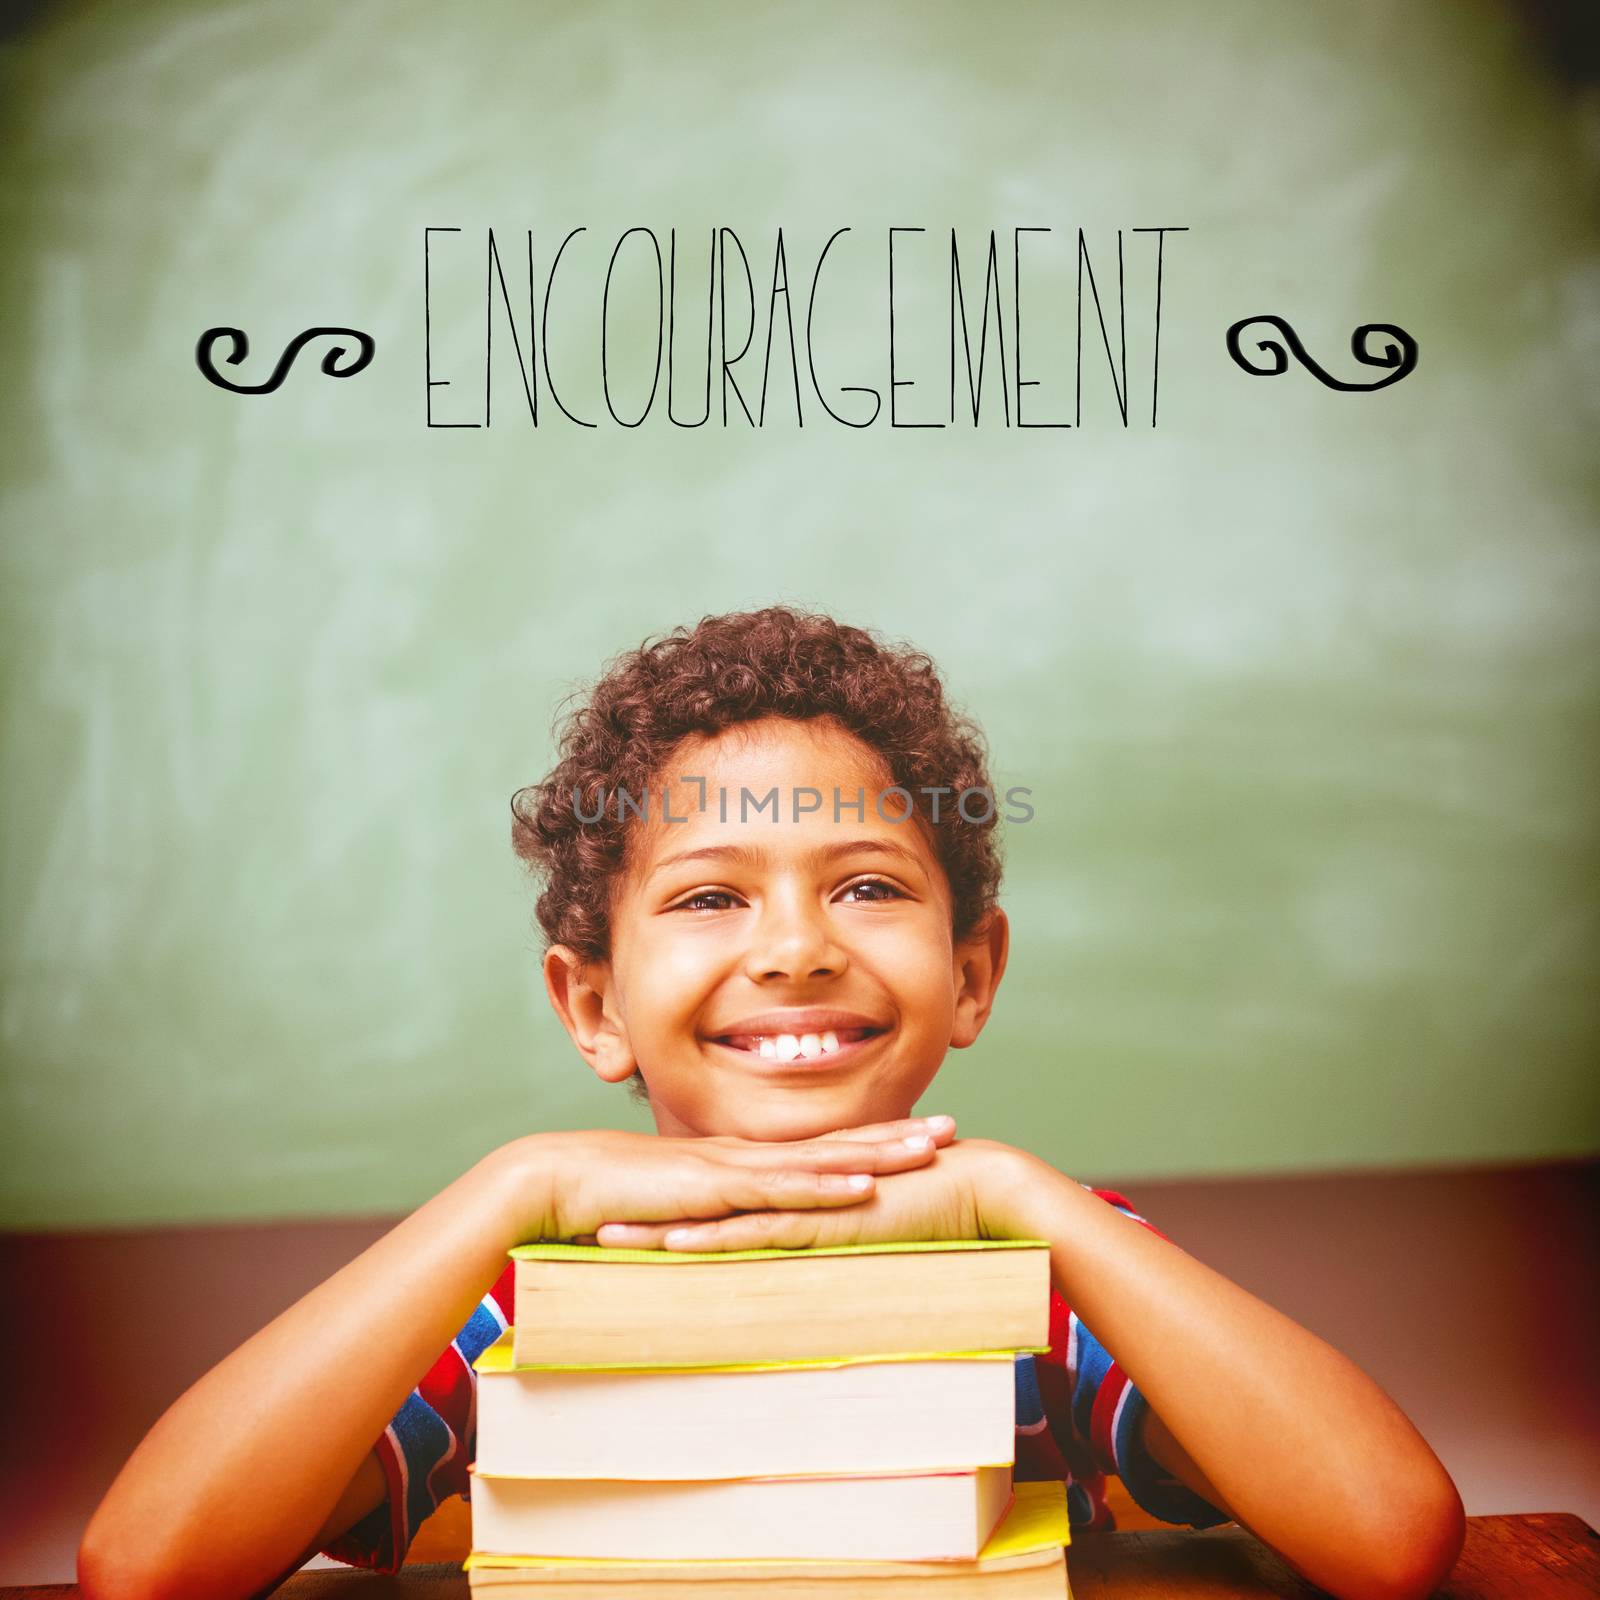 The word encouragement against little boy with stack of books in classroom